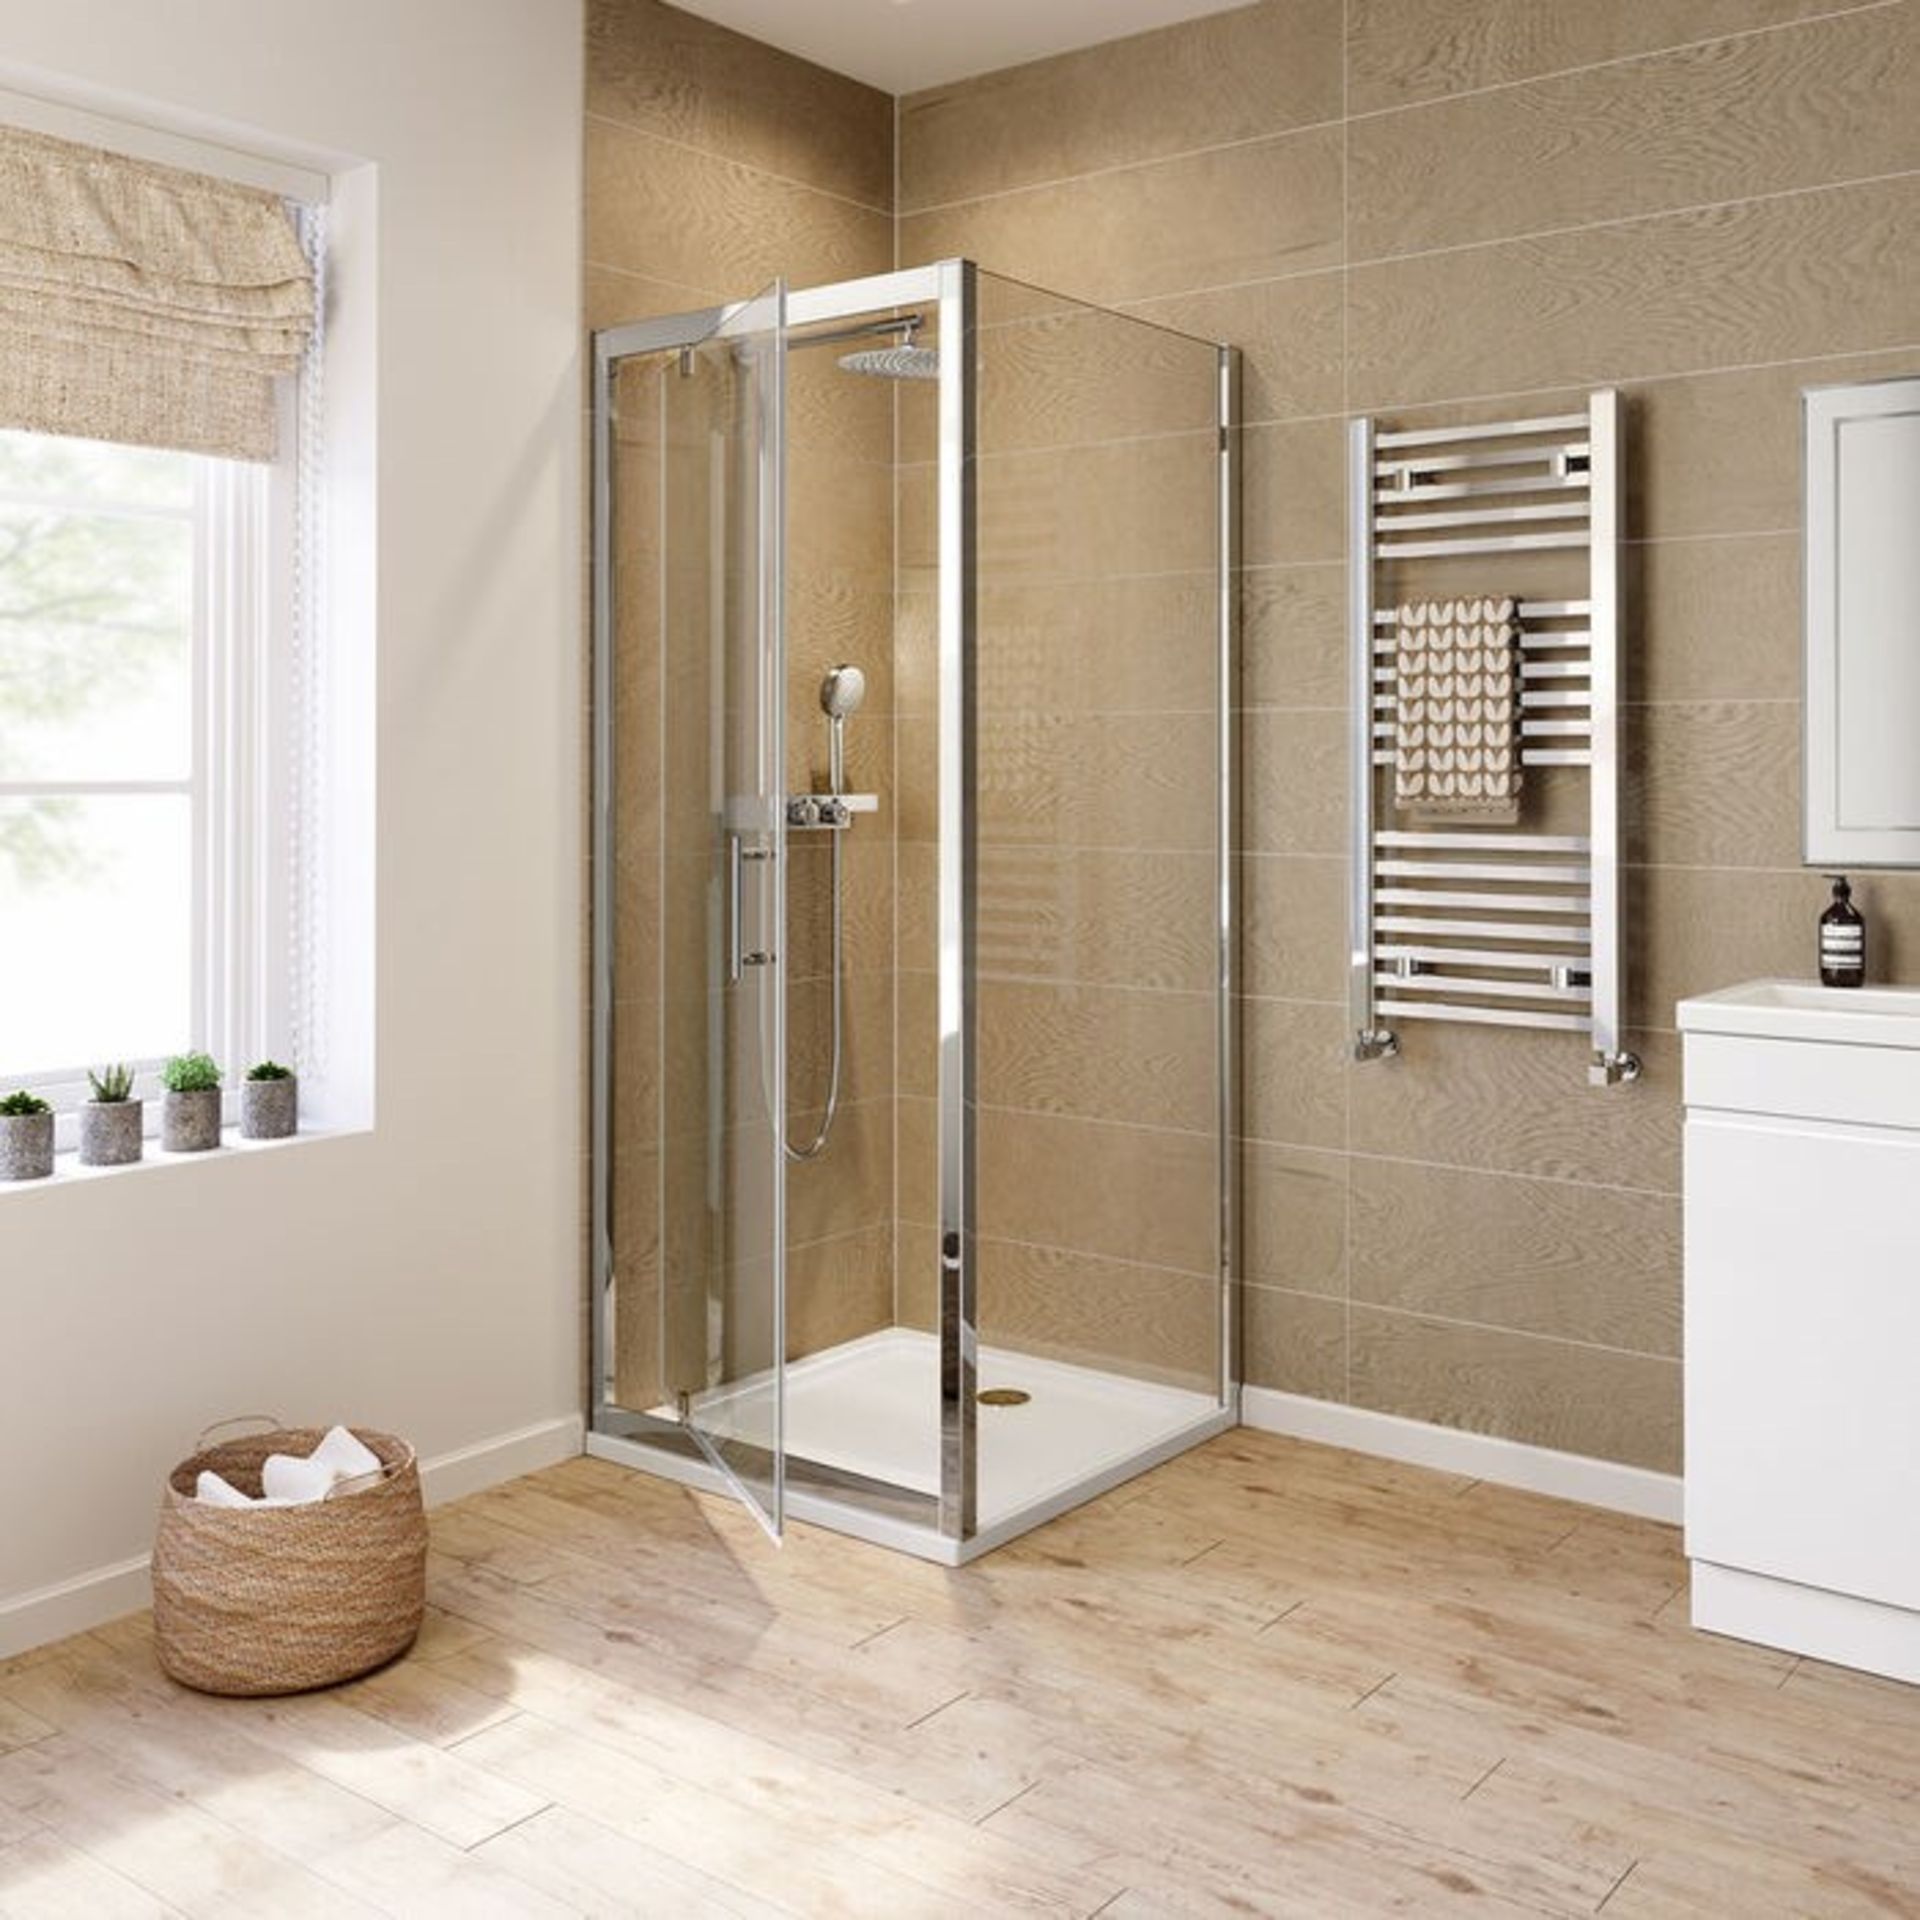 Twyfords 700x700mm - 6mm - Elements Pivot Door Shower Enclosure. RRP £330.99.6mm Safety Glass ... - Image 3 of 4